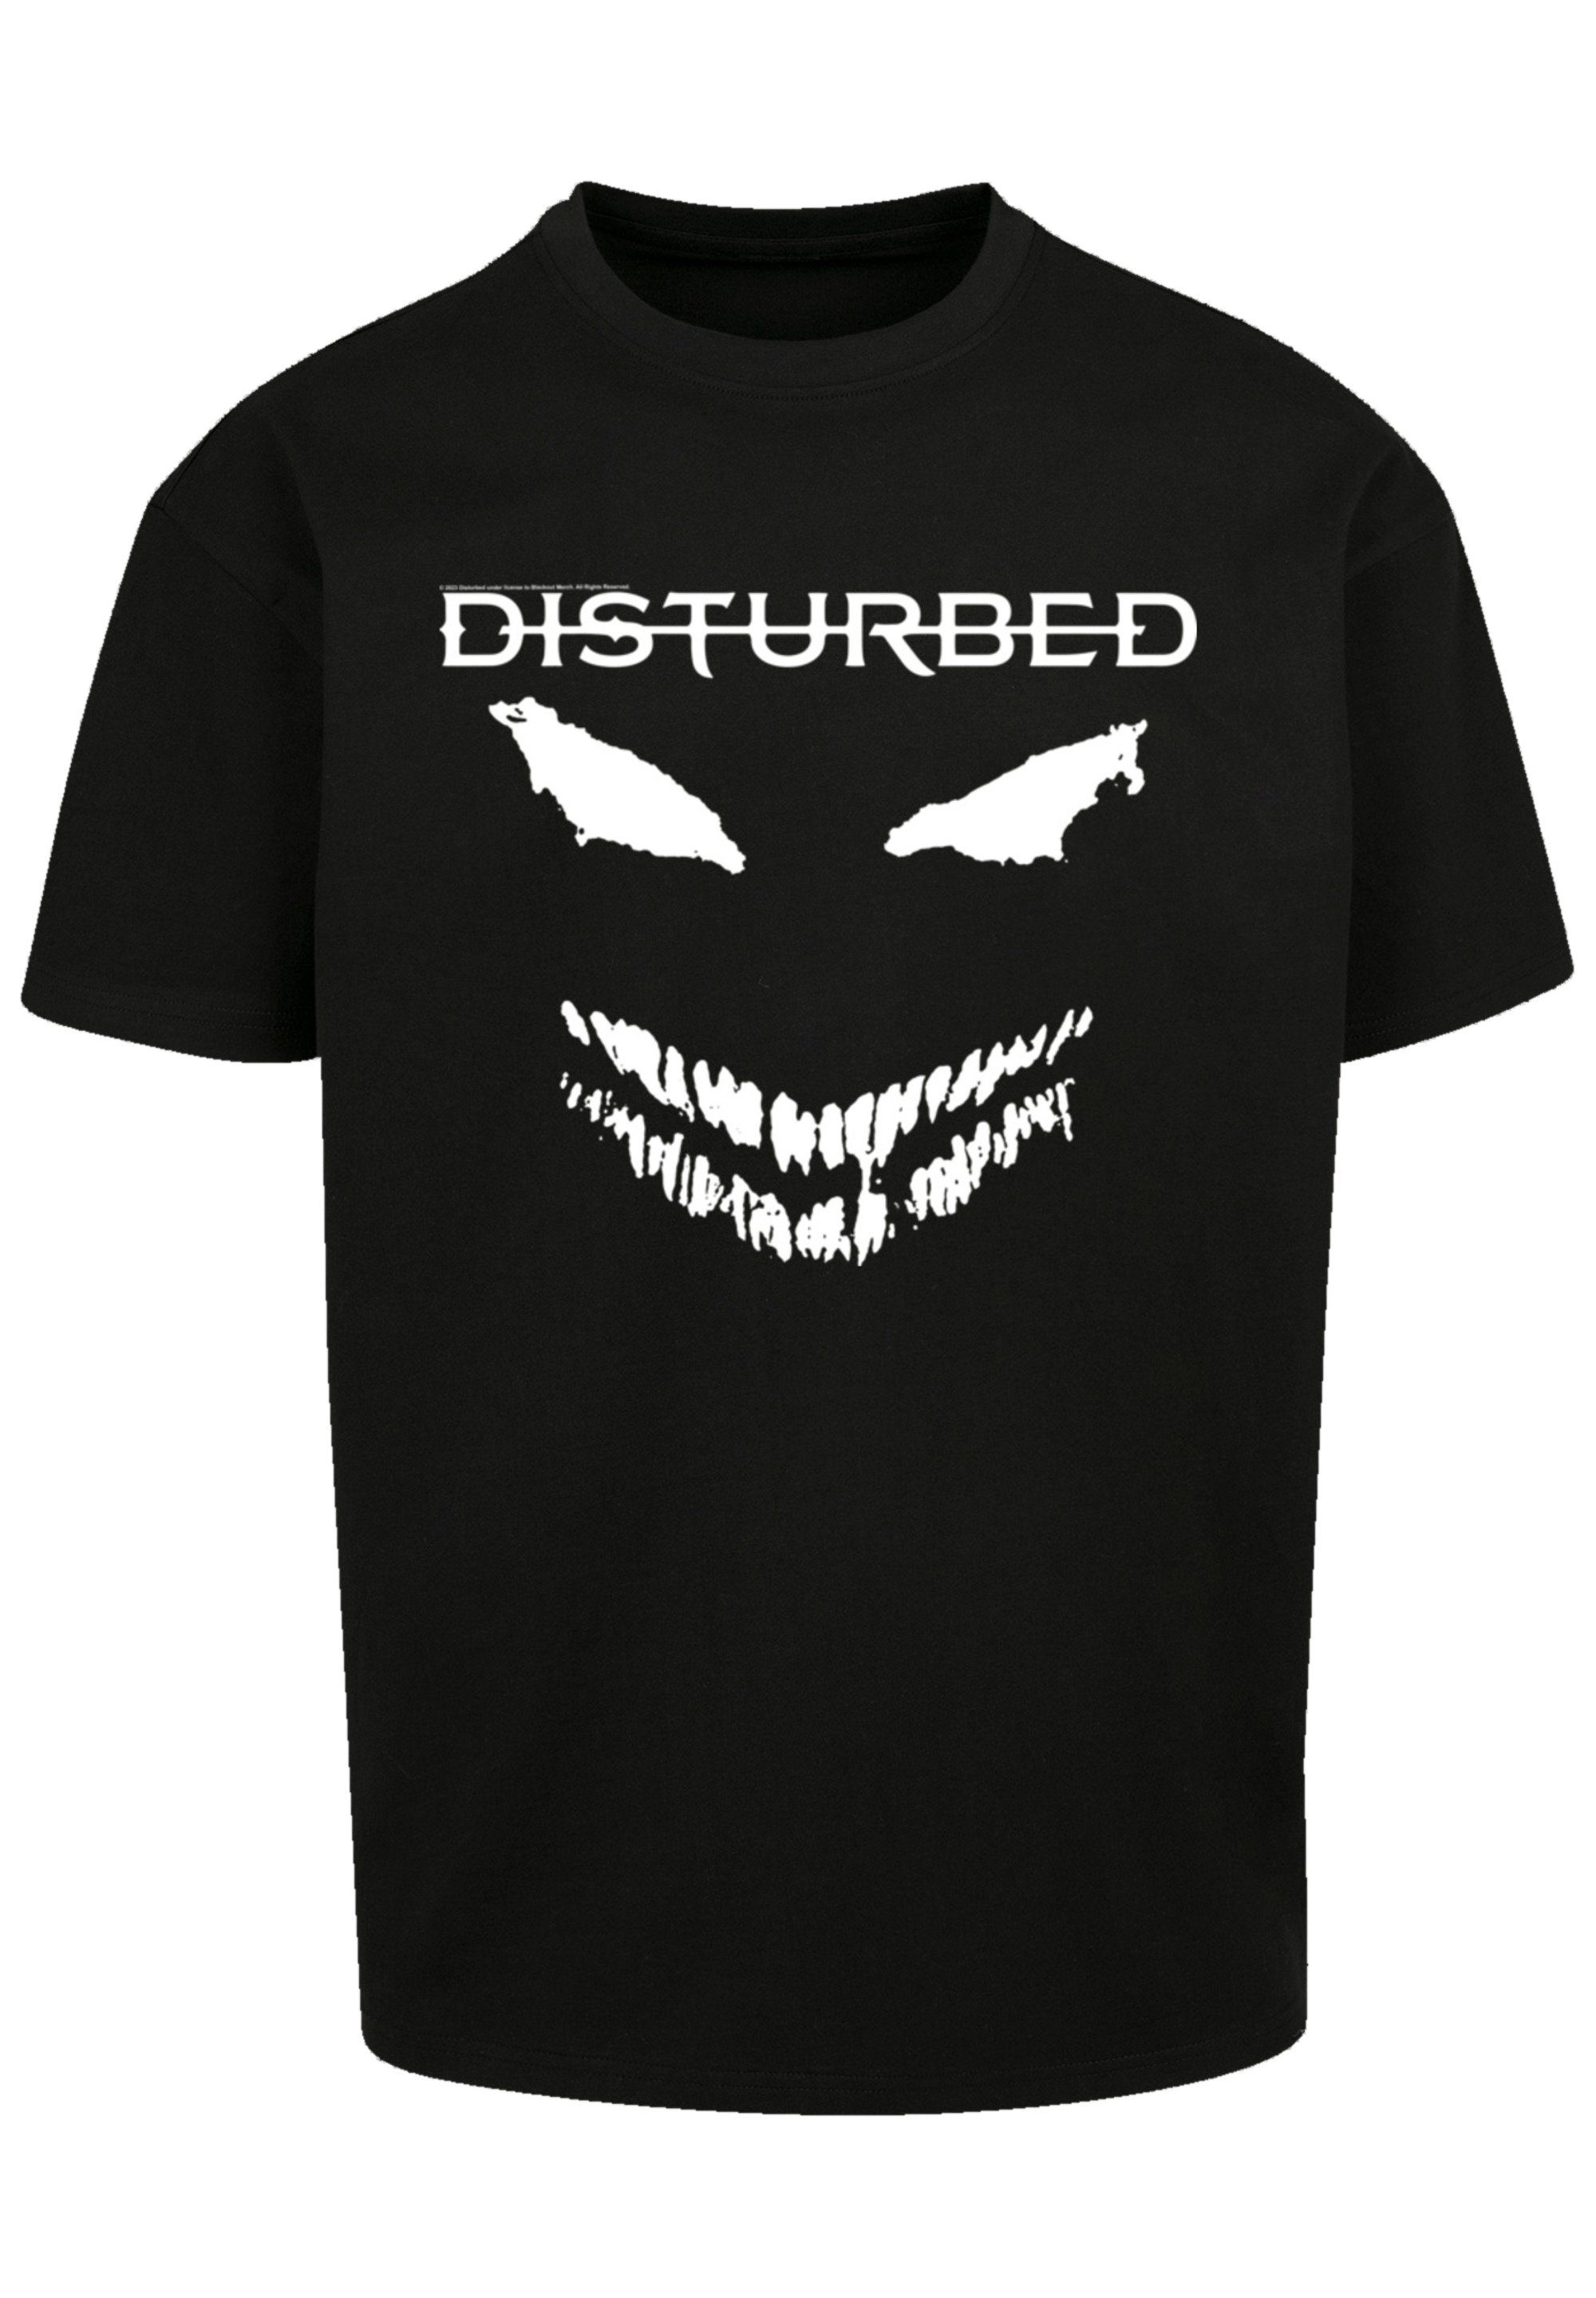 Scary T-Shirt Qualität, schwarz Heavy Band Metal F4NT4STIC Disturbed Rock-Musik, Face Candle Premium